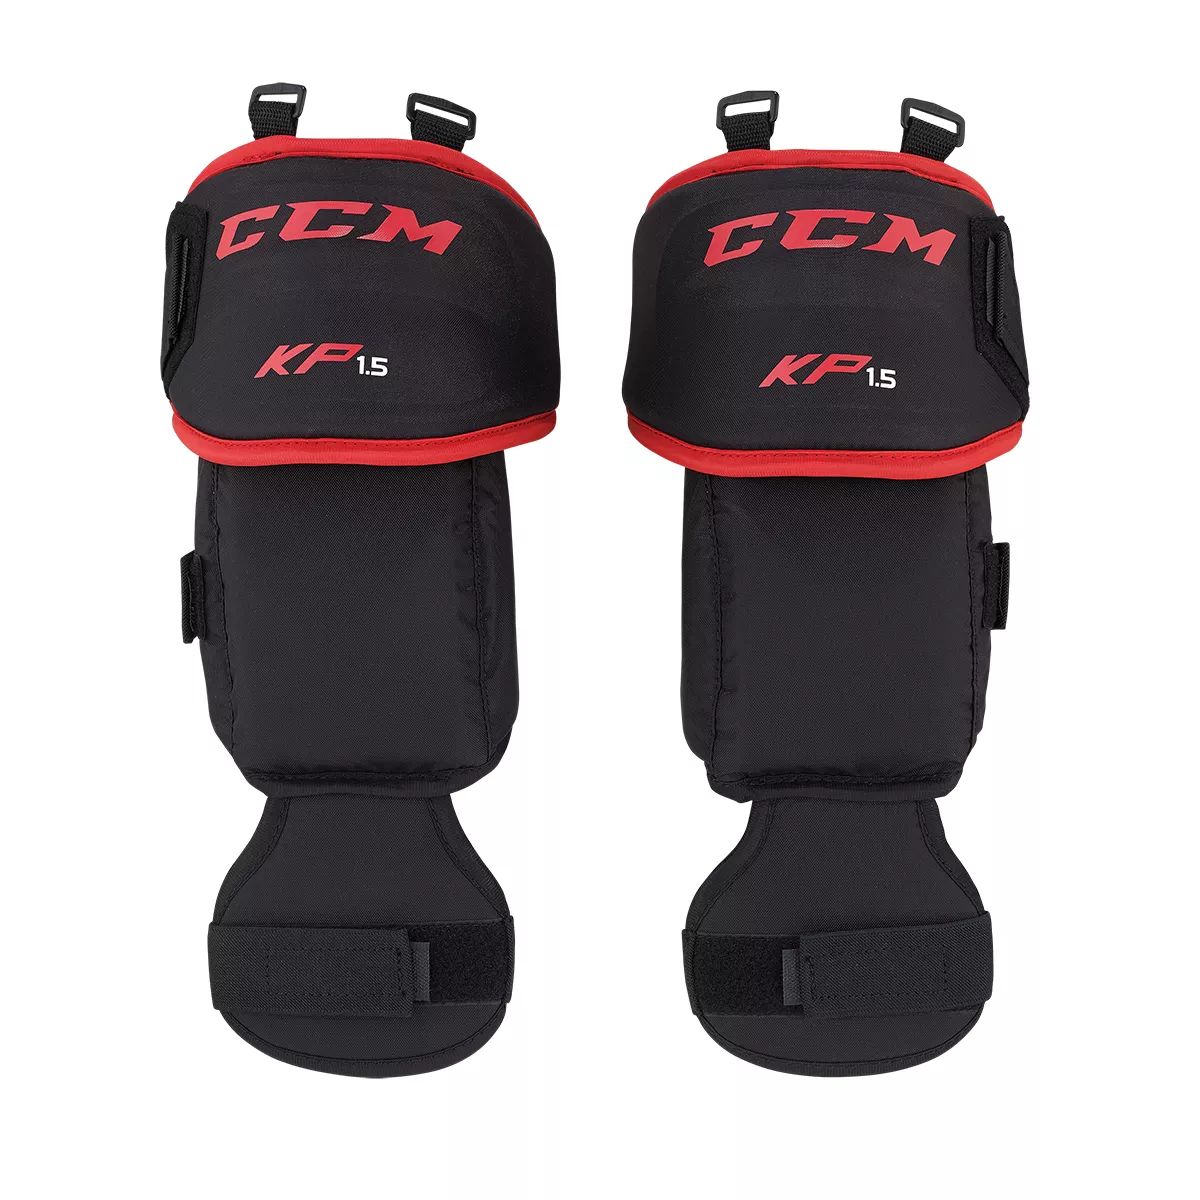 Image of CCM 1.5 Youth Goalie Knee Protectors